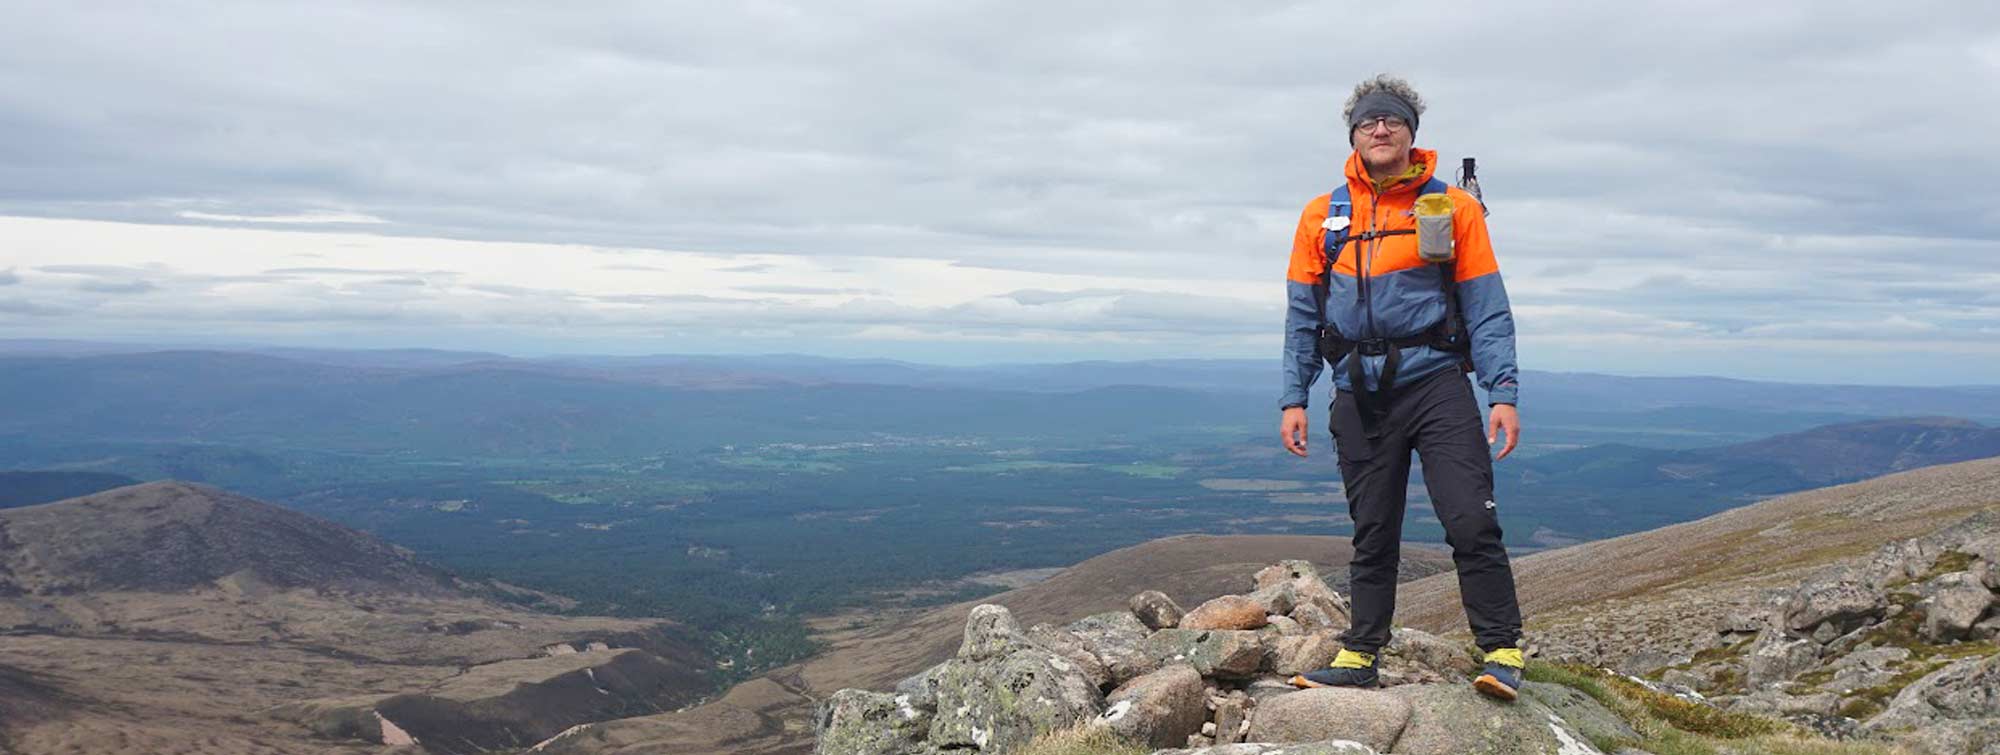 Berghaus Extrem MTN Guide MW Technical Pant Review - “After extensive use,  I have found them to be some of the most unrestrictive and hard-wearing  trousers I have used.” - Ultralight Outdoor